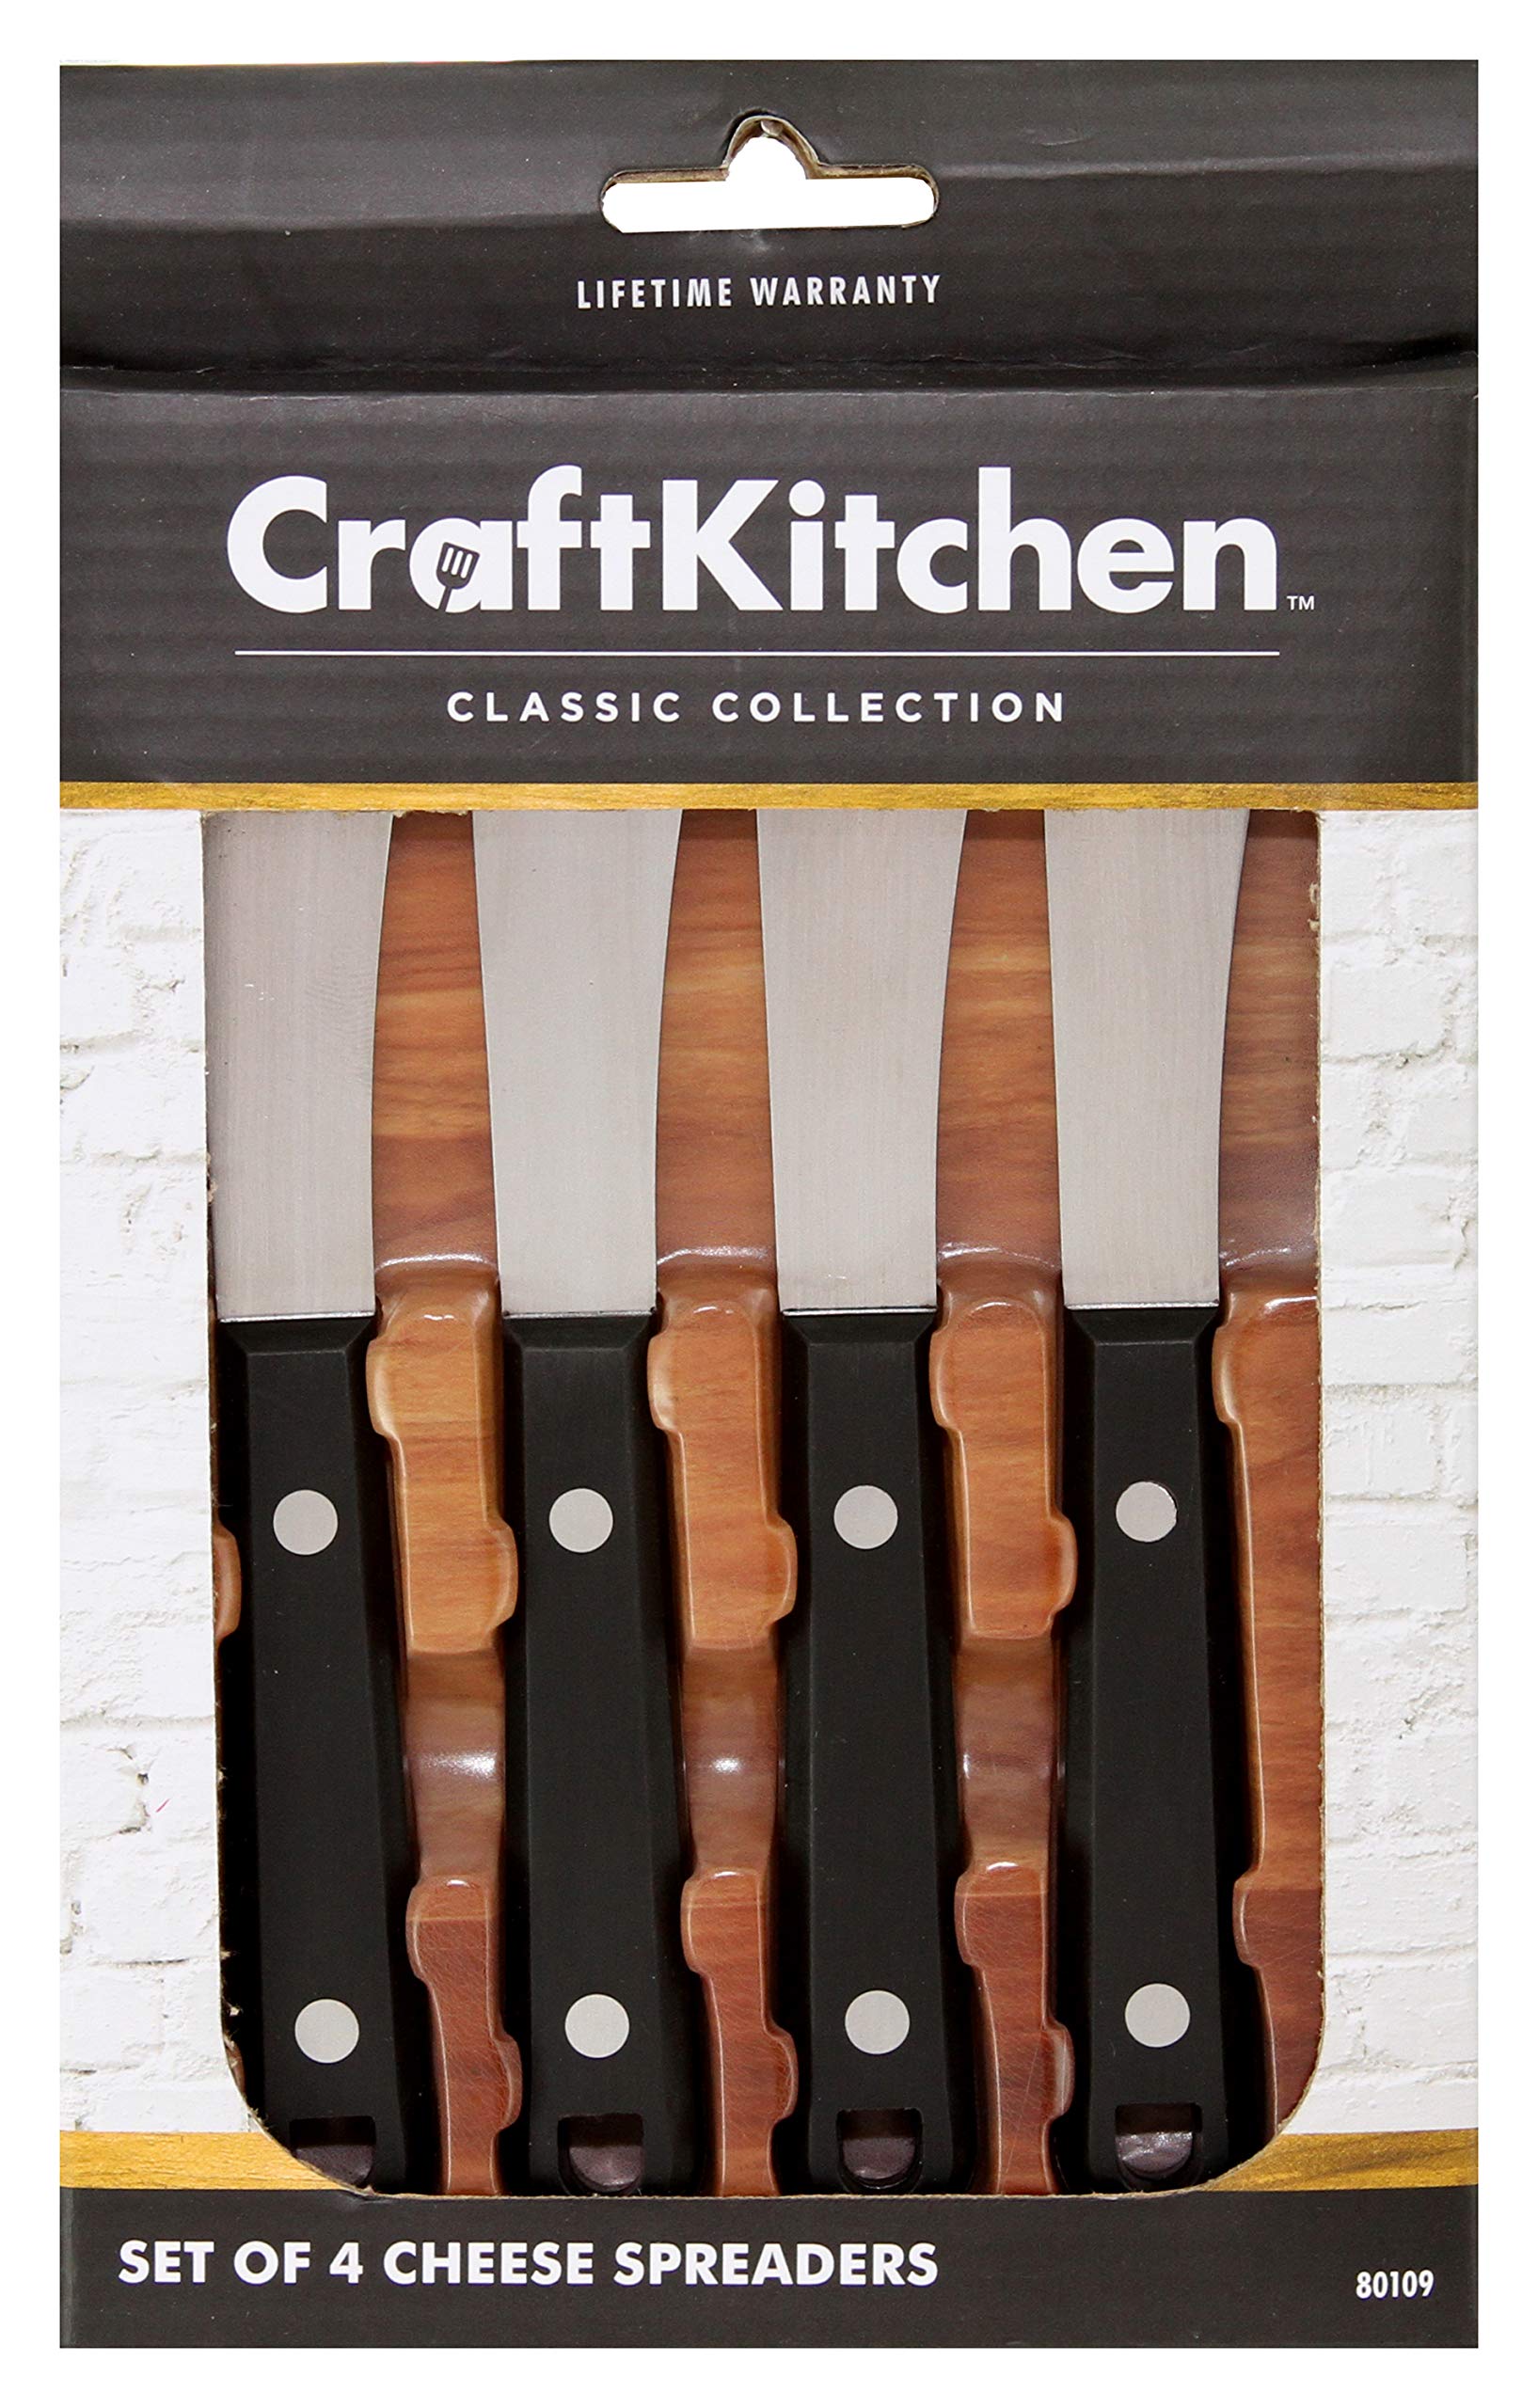 CraftKitchen Cheese Tool Sets (Cheese Spreaders Set of 4)